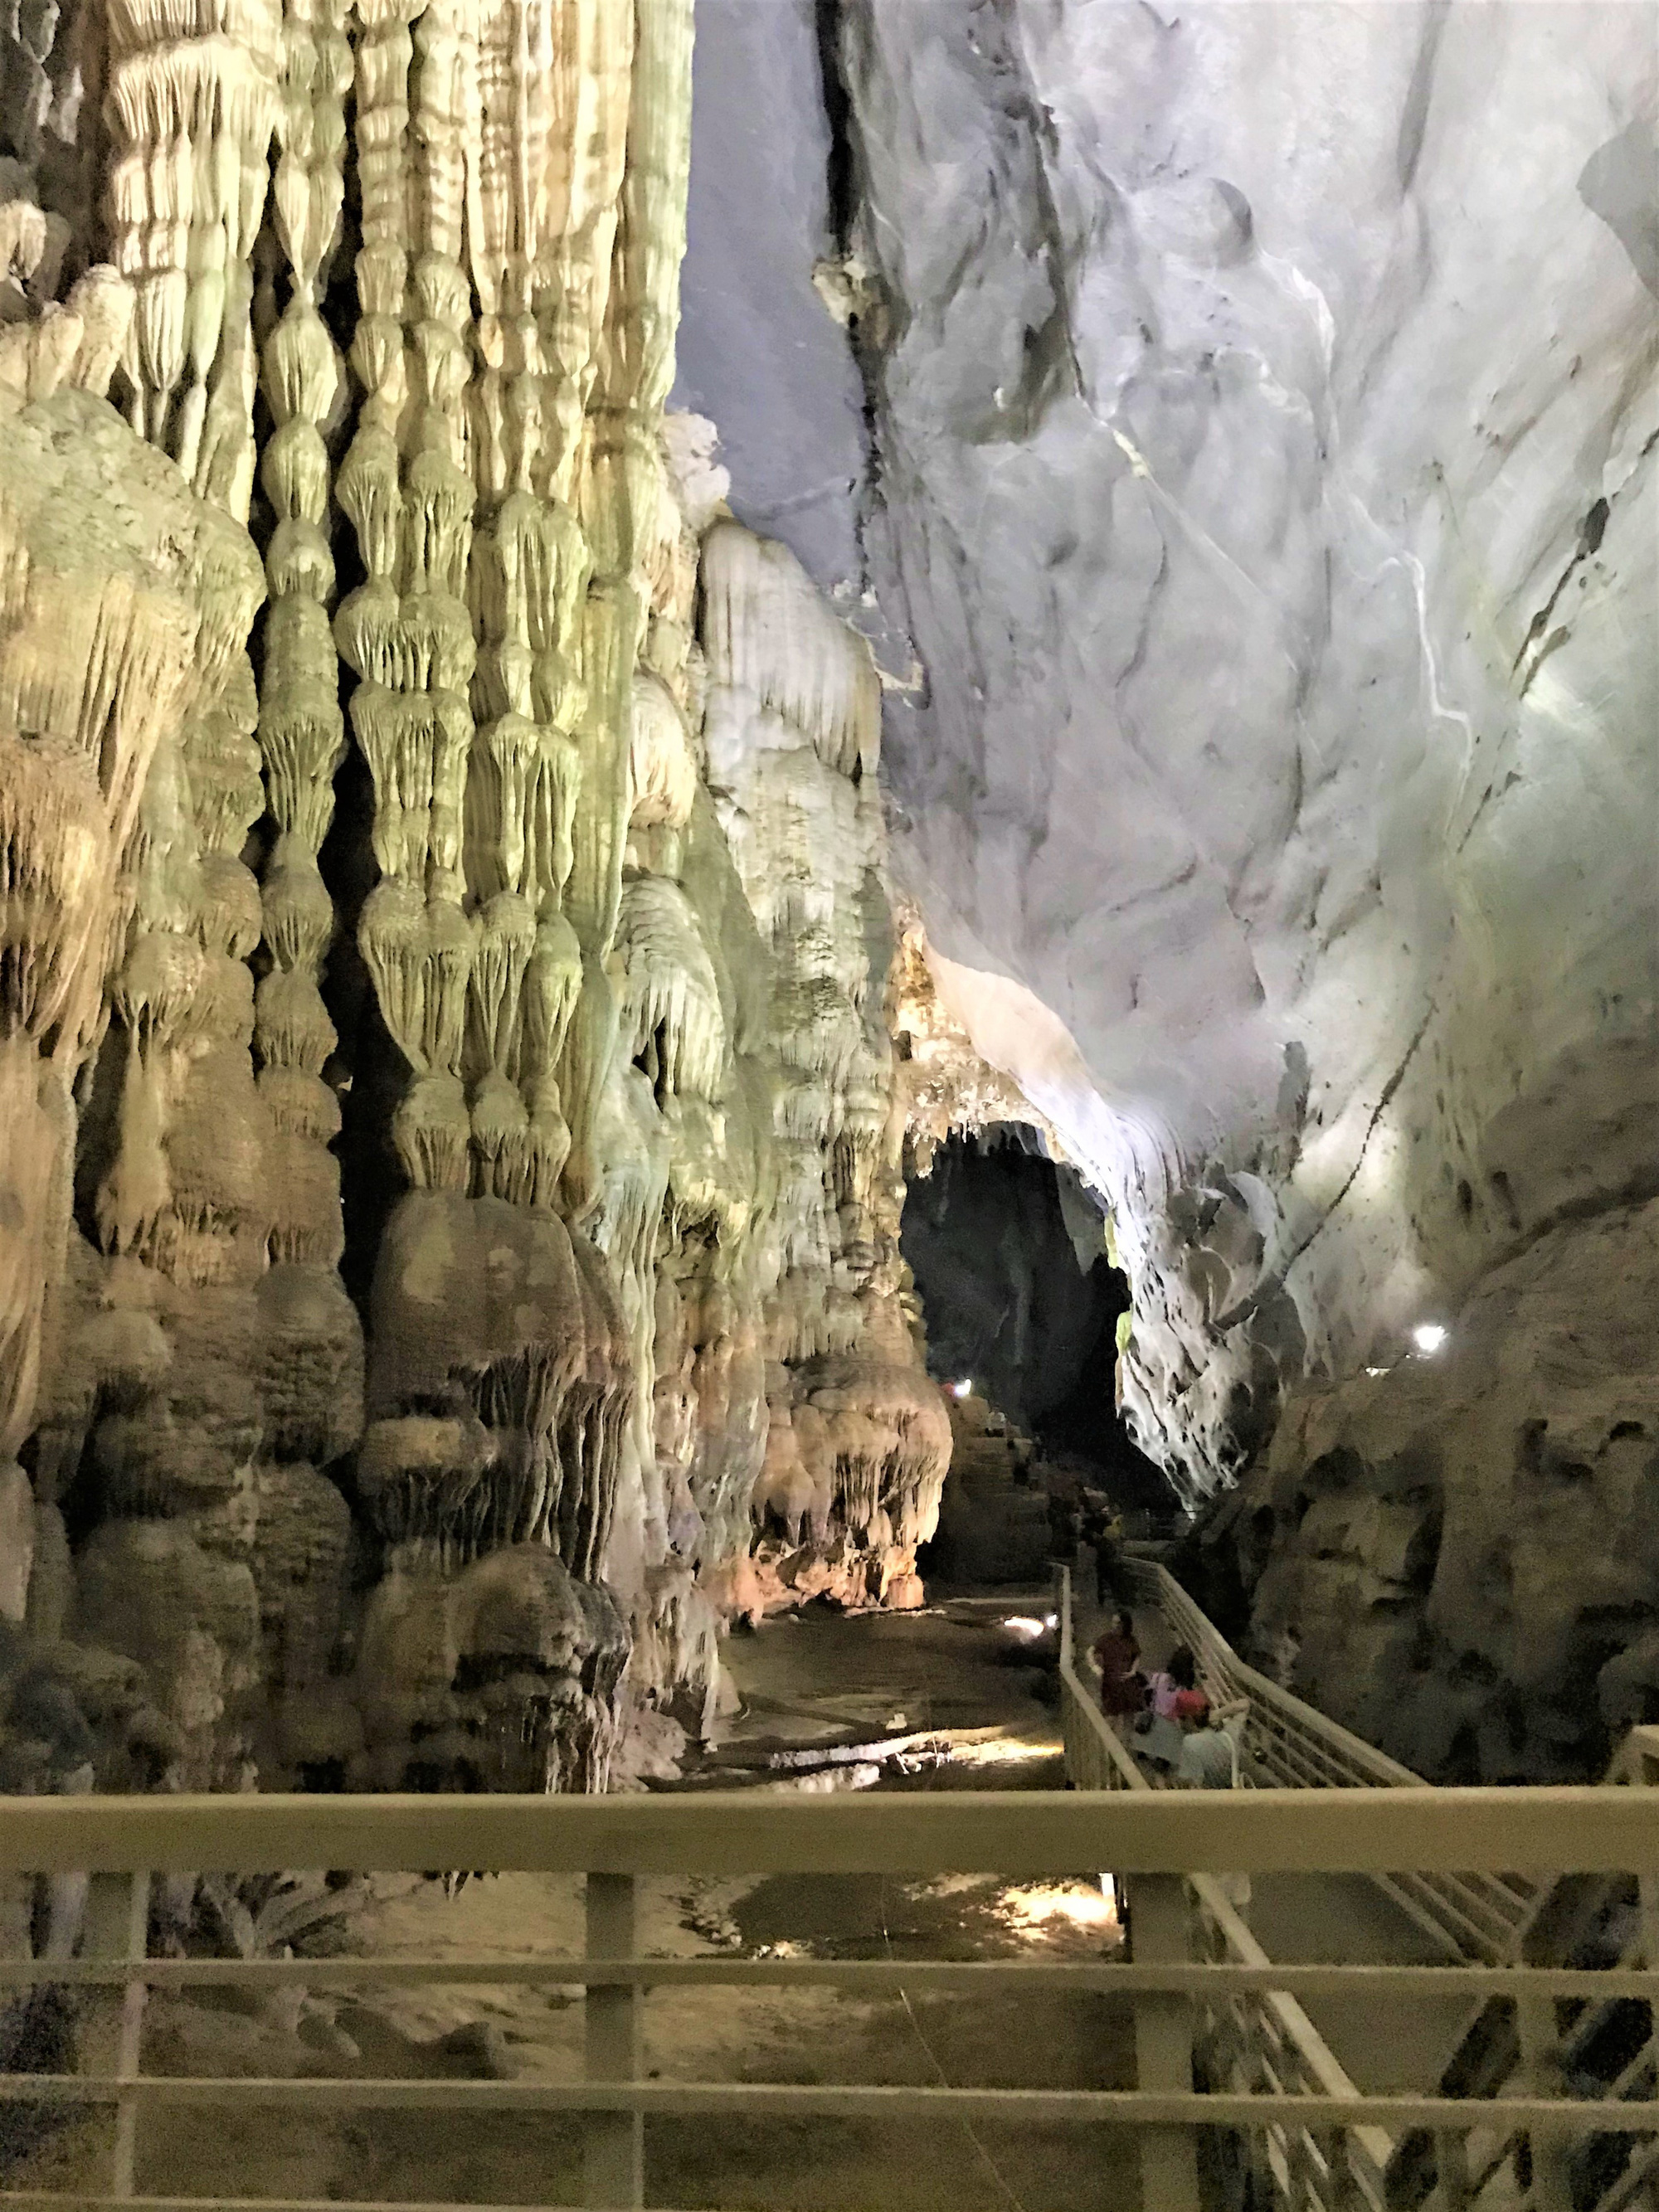 A score of stalactites in Phong Nha Cave in Quang Binh Province, Vietnam are captured in this photo.